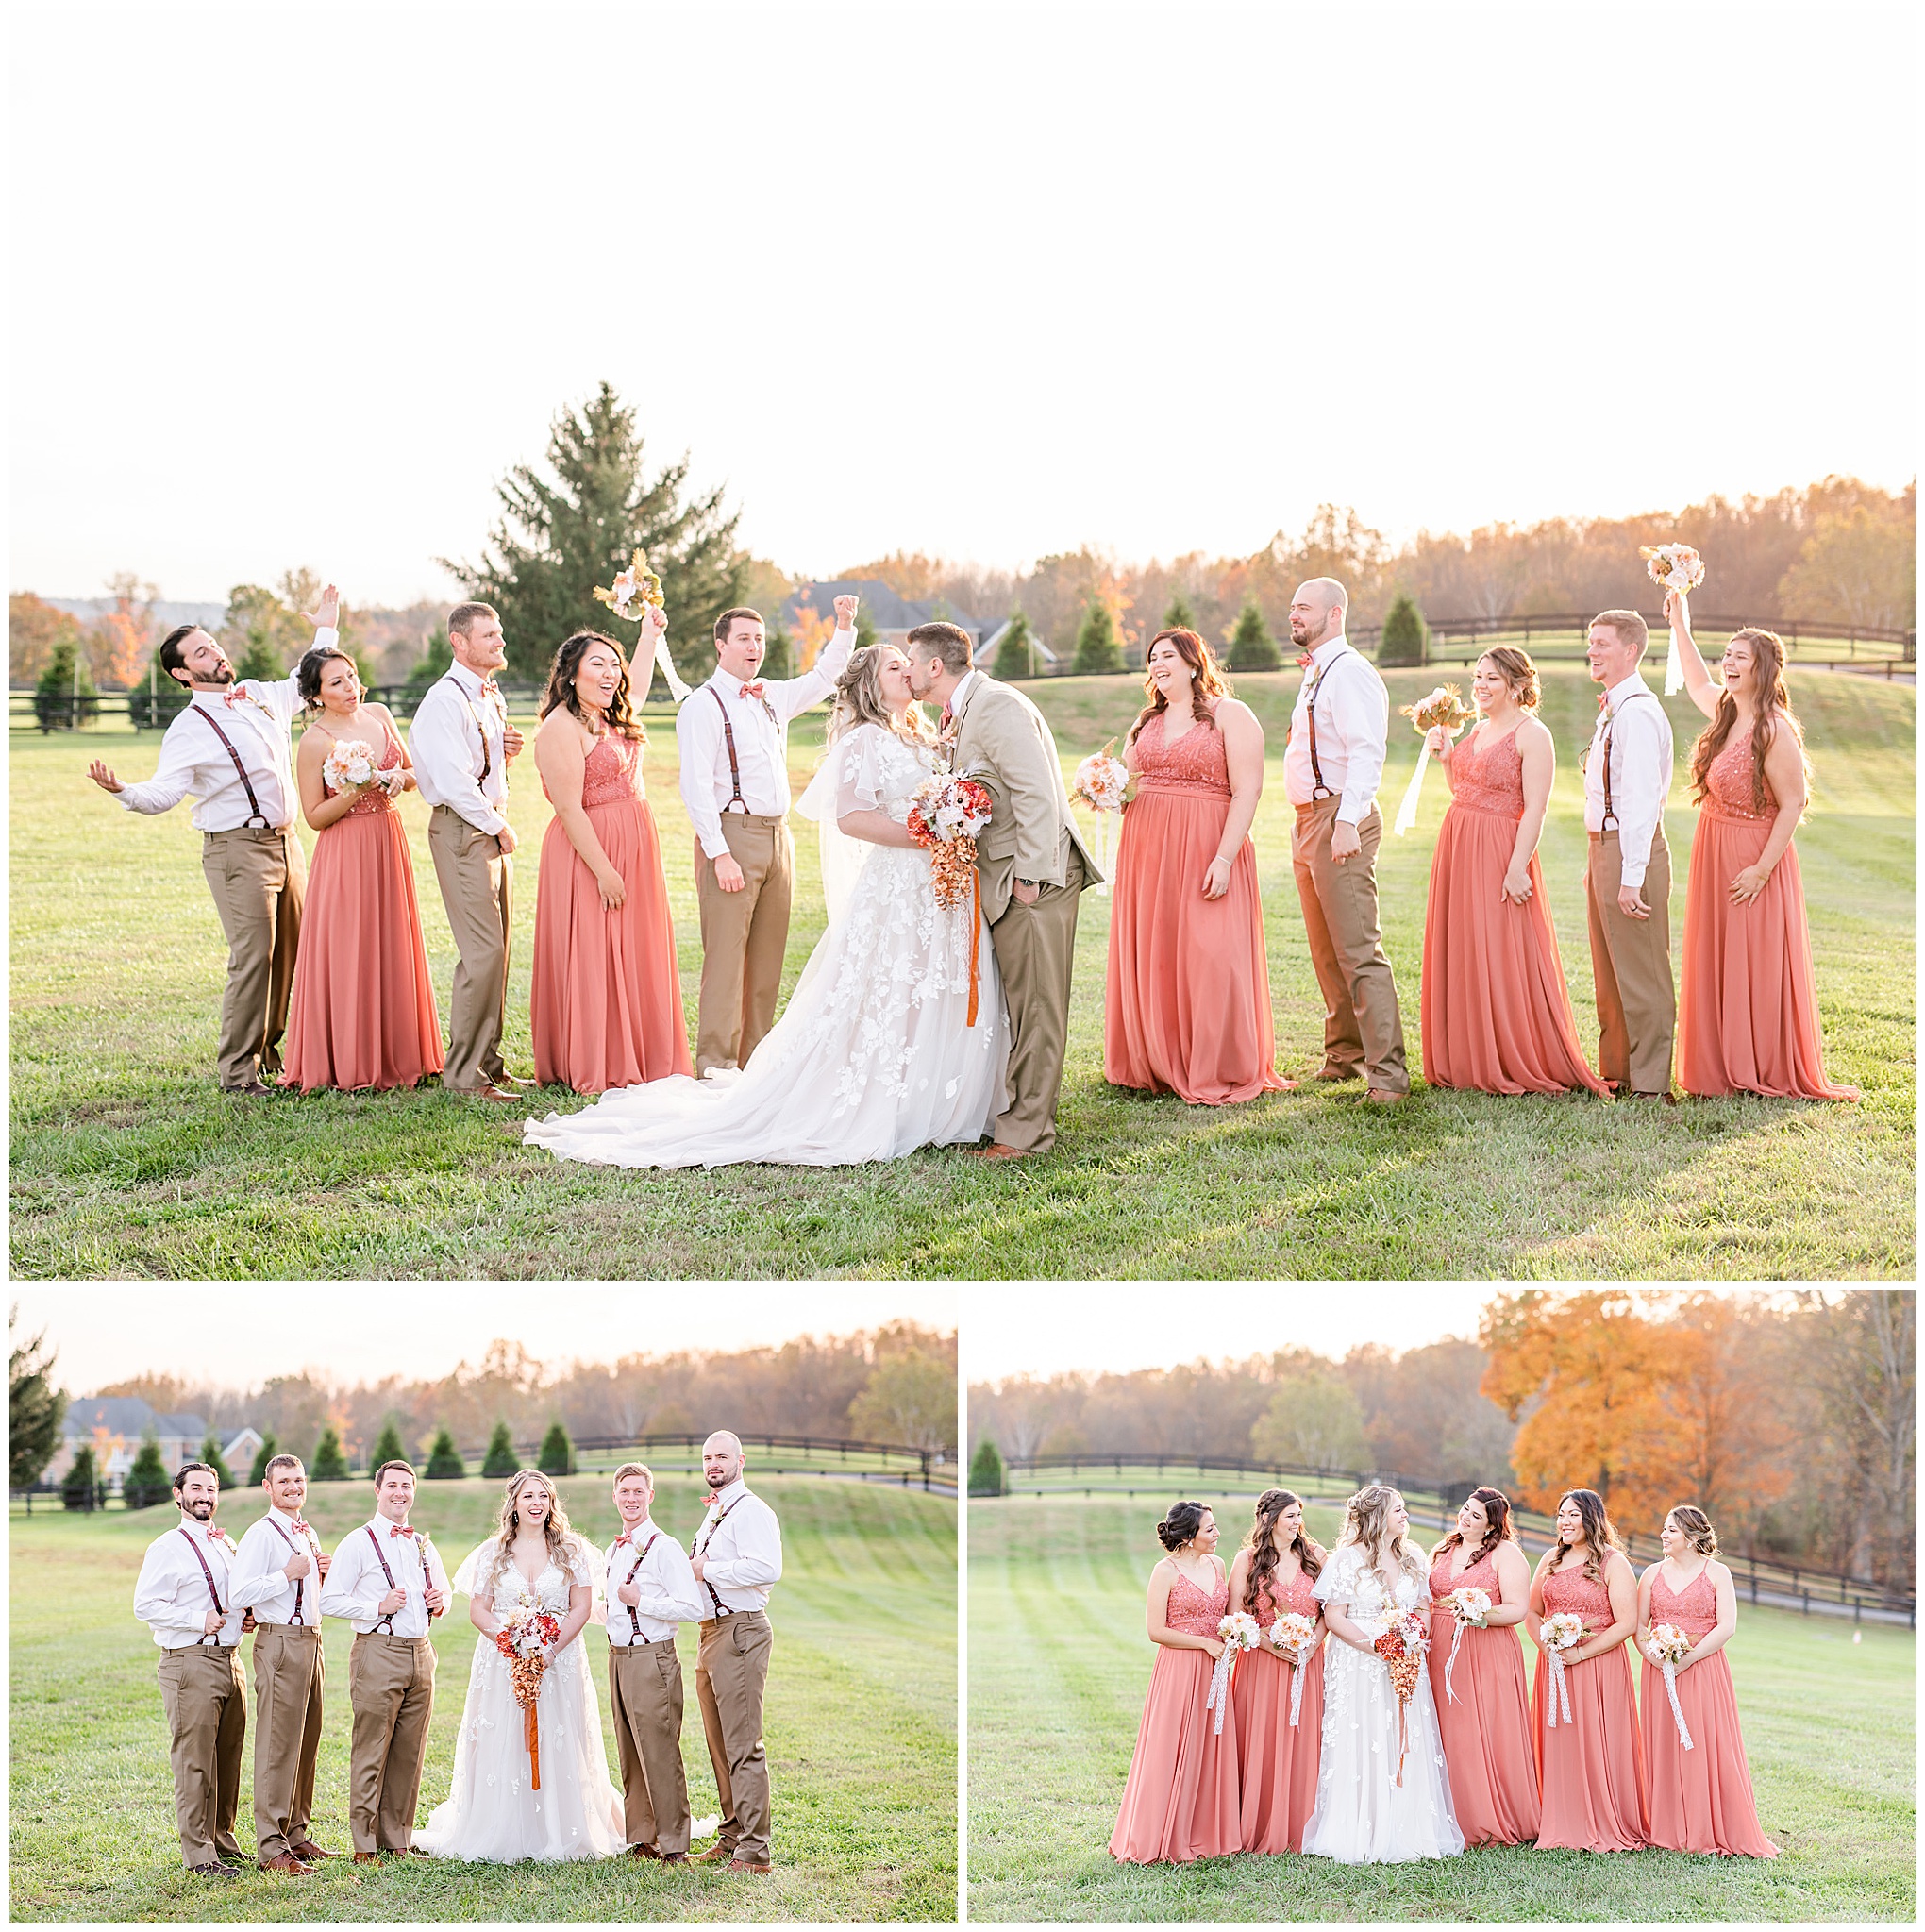 fall colors Middleburg Virginia wedding, Middleburg wedding, Middleburg wedding photographer, Loudoun County wedding photographer, northern Virginia wedding photographer, Middleburg Barn wedding, autumn wedding aesthetic, barn wedding aesthetic, elegant barn wedding, DC wedding photographer, Rachel E.H. Photography, bride and groom kissing, wedding party celebrating, bride with groomsmen, bride with bridesmaids, Kennedy Blue bridesmaids dresses